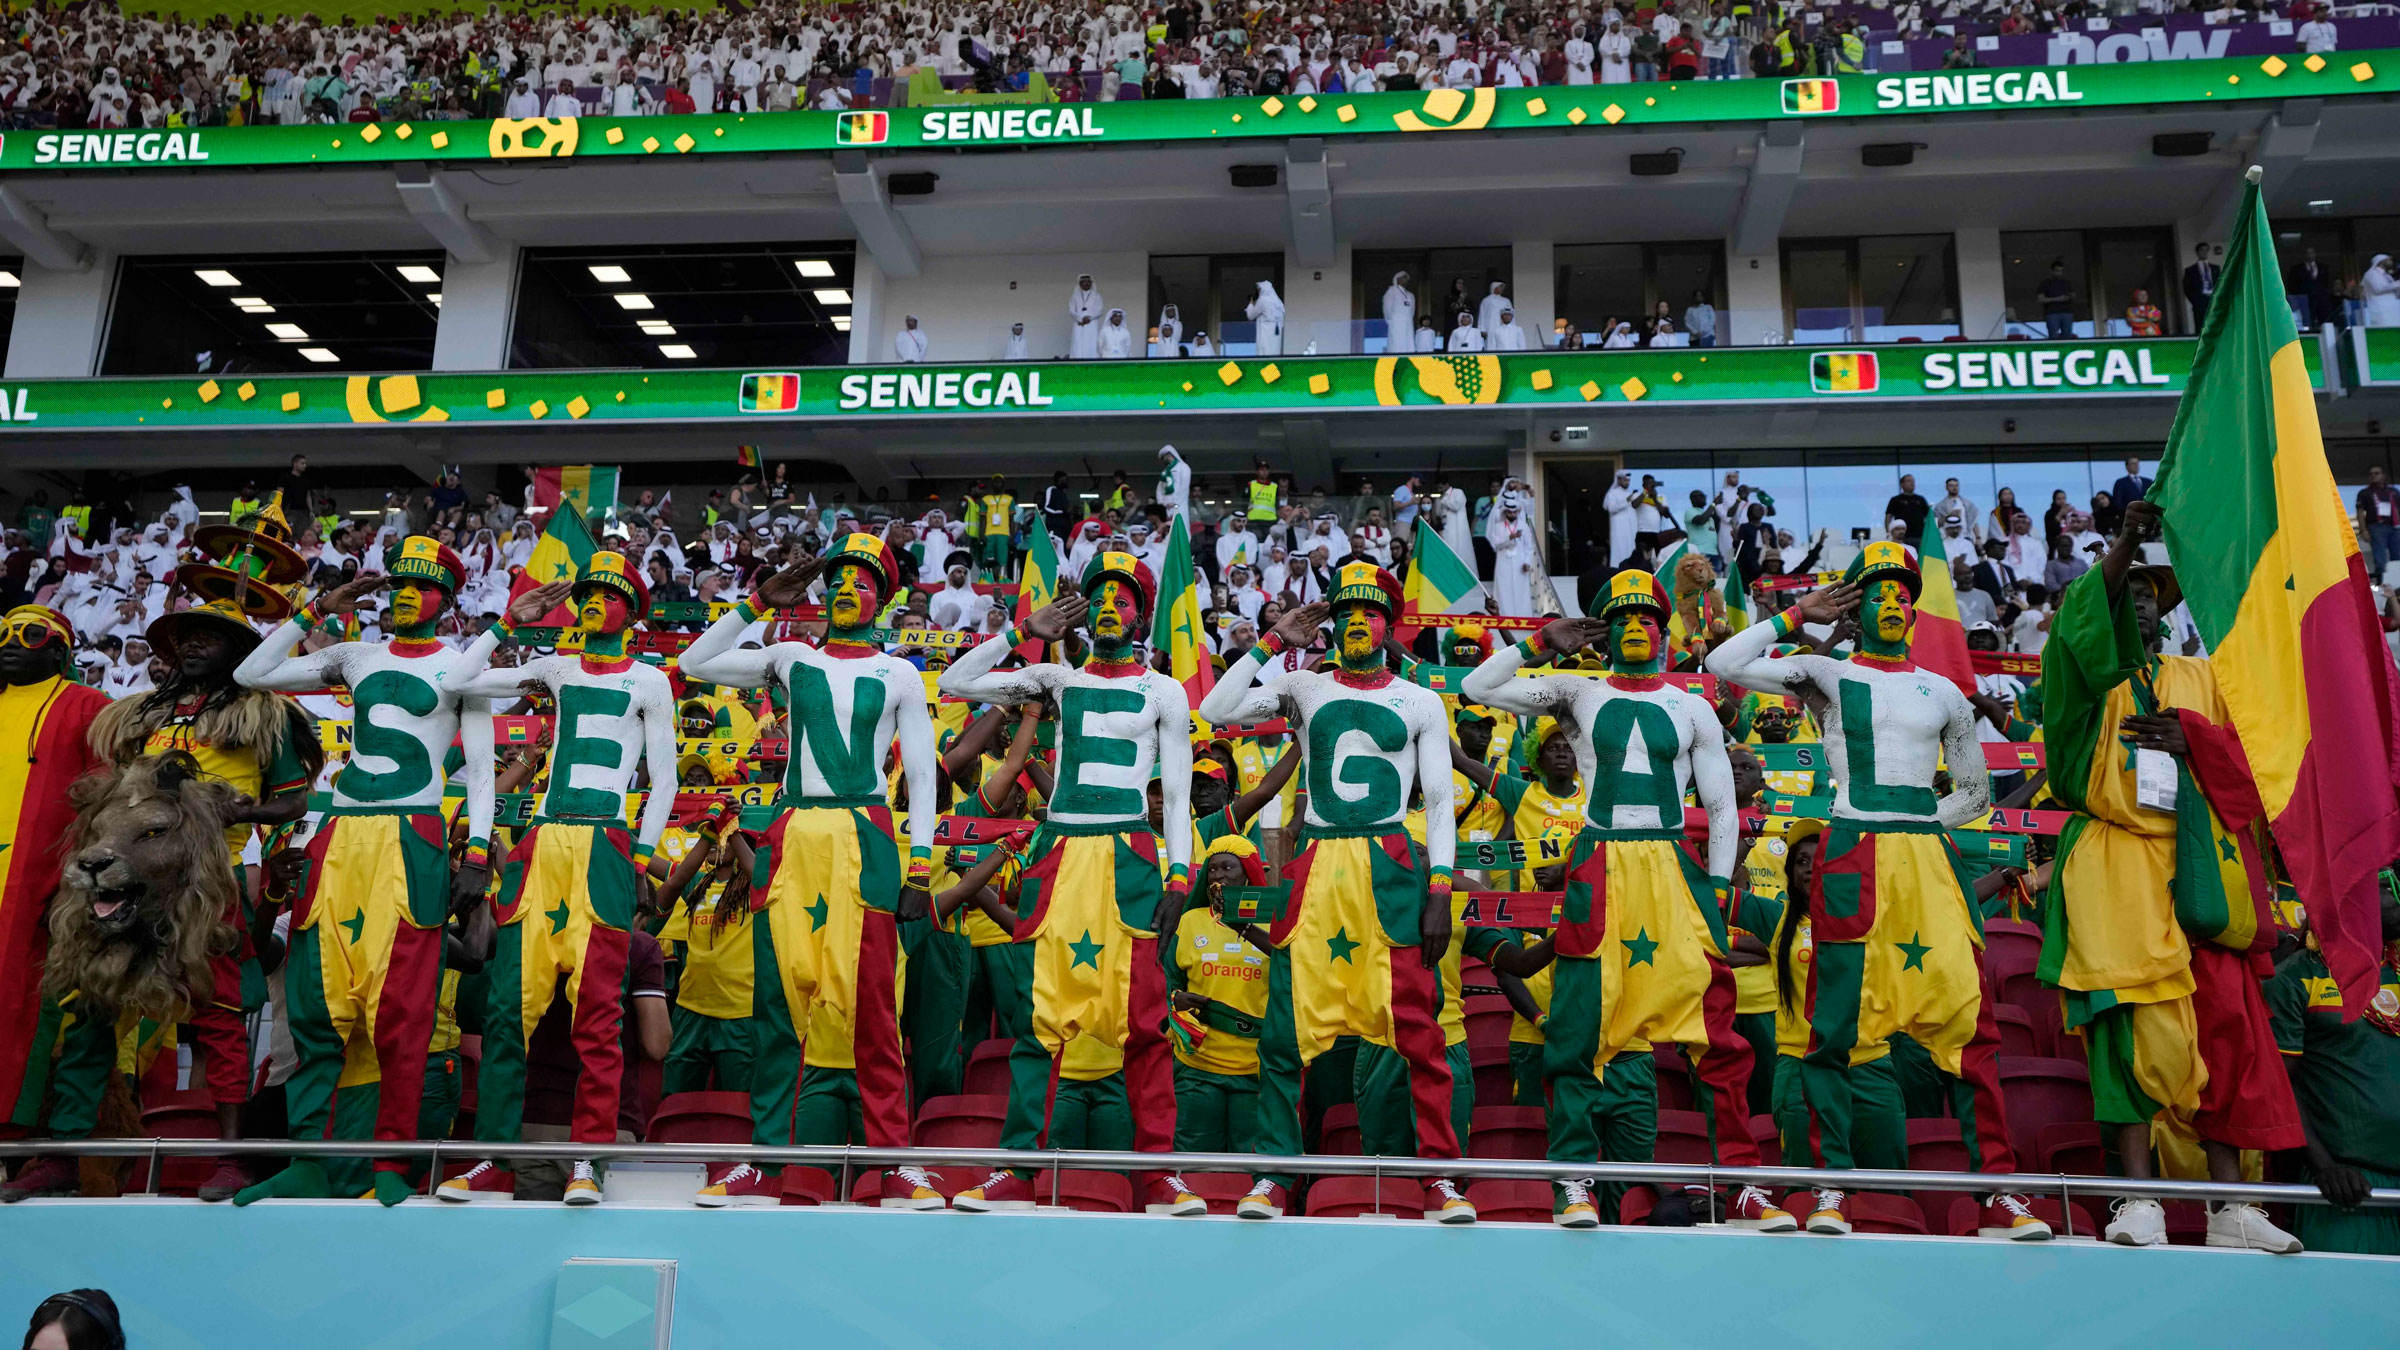 The 12e Gaindé – the now iconic row of fans with their shirts off and bodies painted, spelling out S-E-N-E-G-A-L – before Senegal's game against Qatar on Friday.